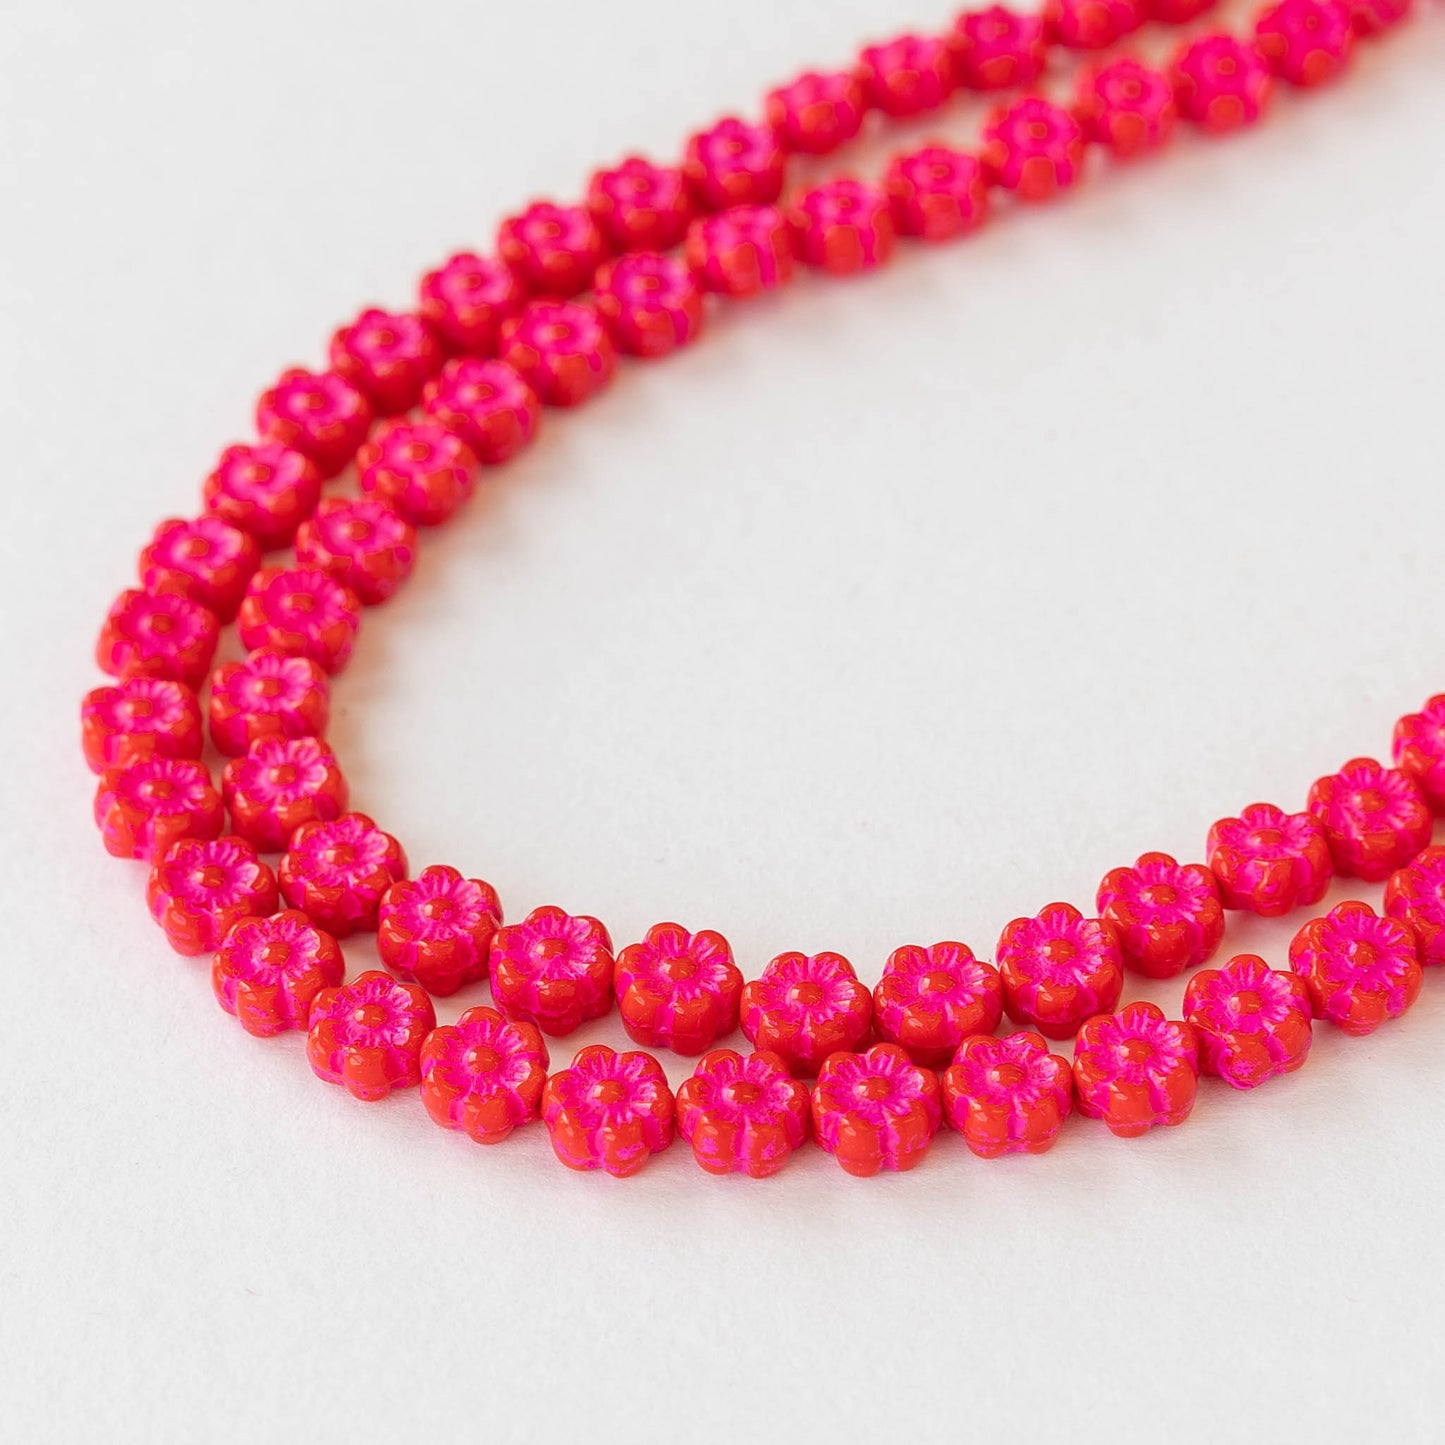 Load image into Gallery viewer, 6mm Glass Flower Beads - Red with Pink Wash - 30 beads
